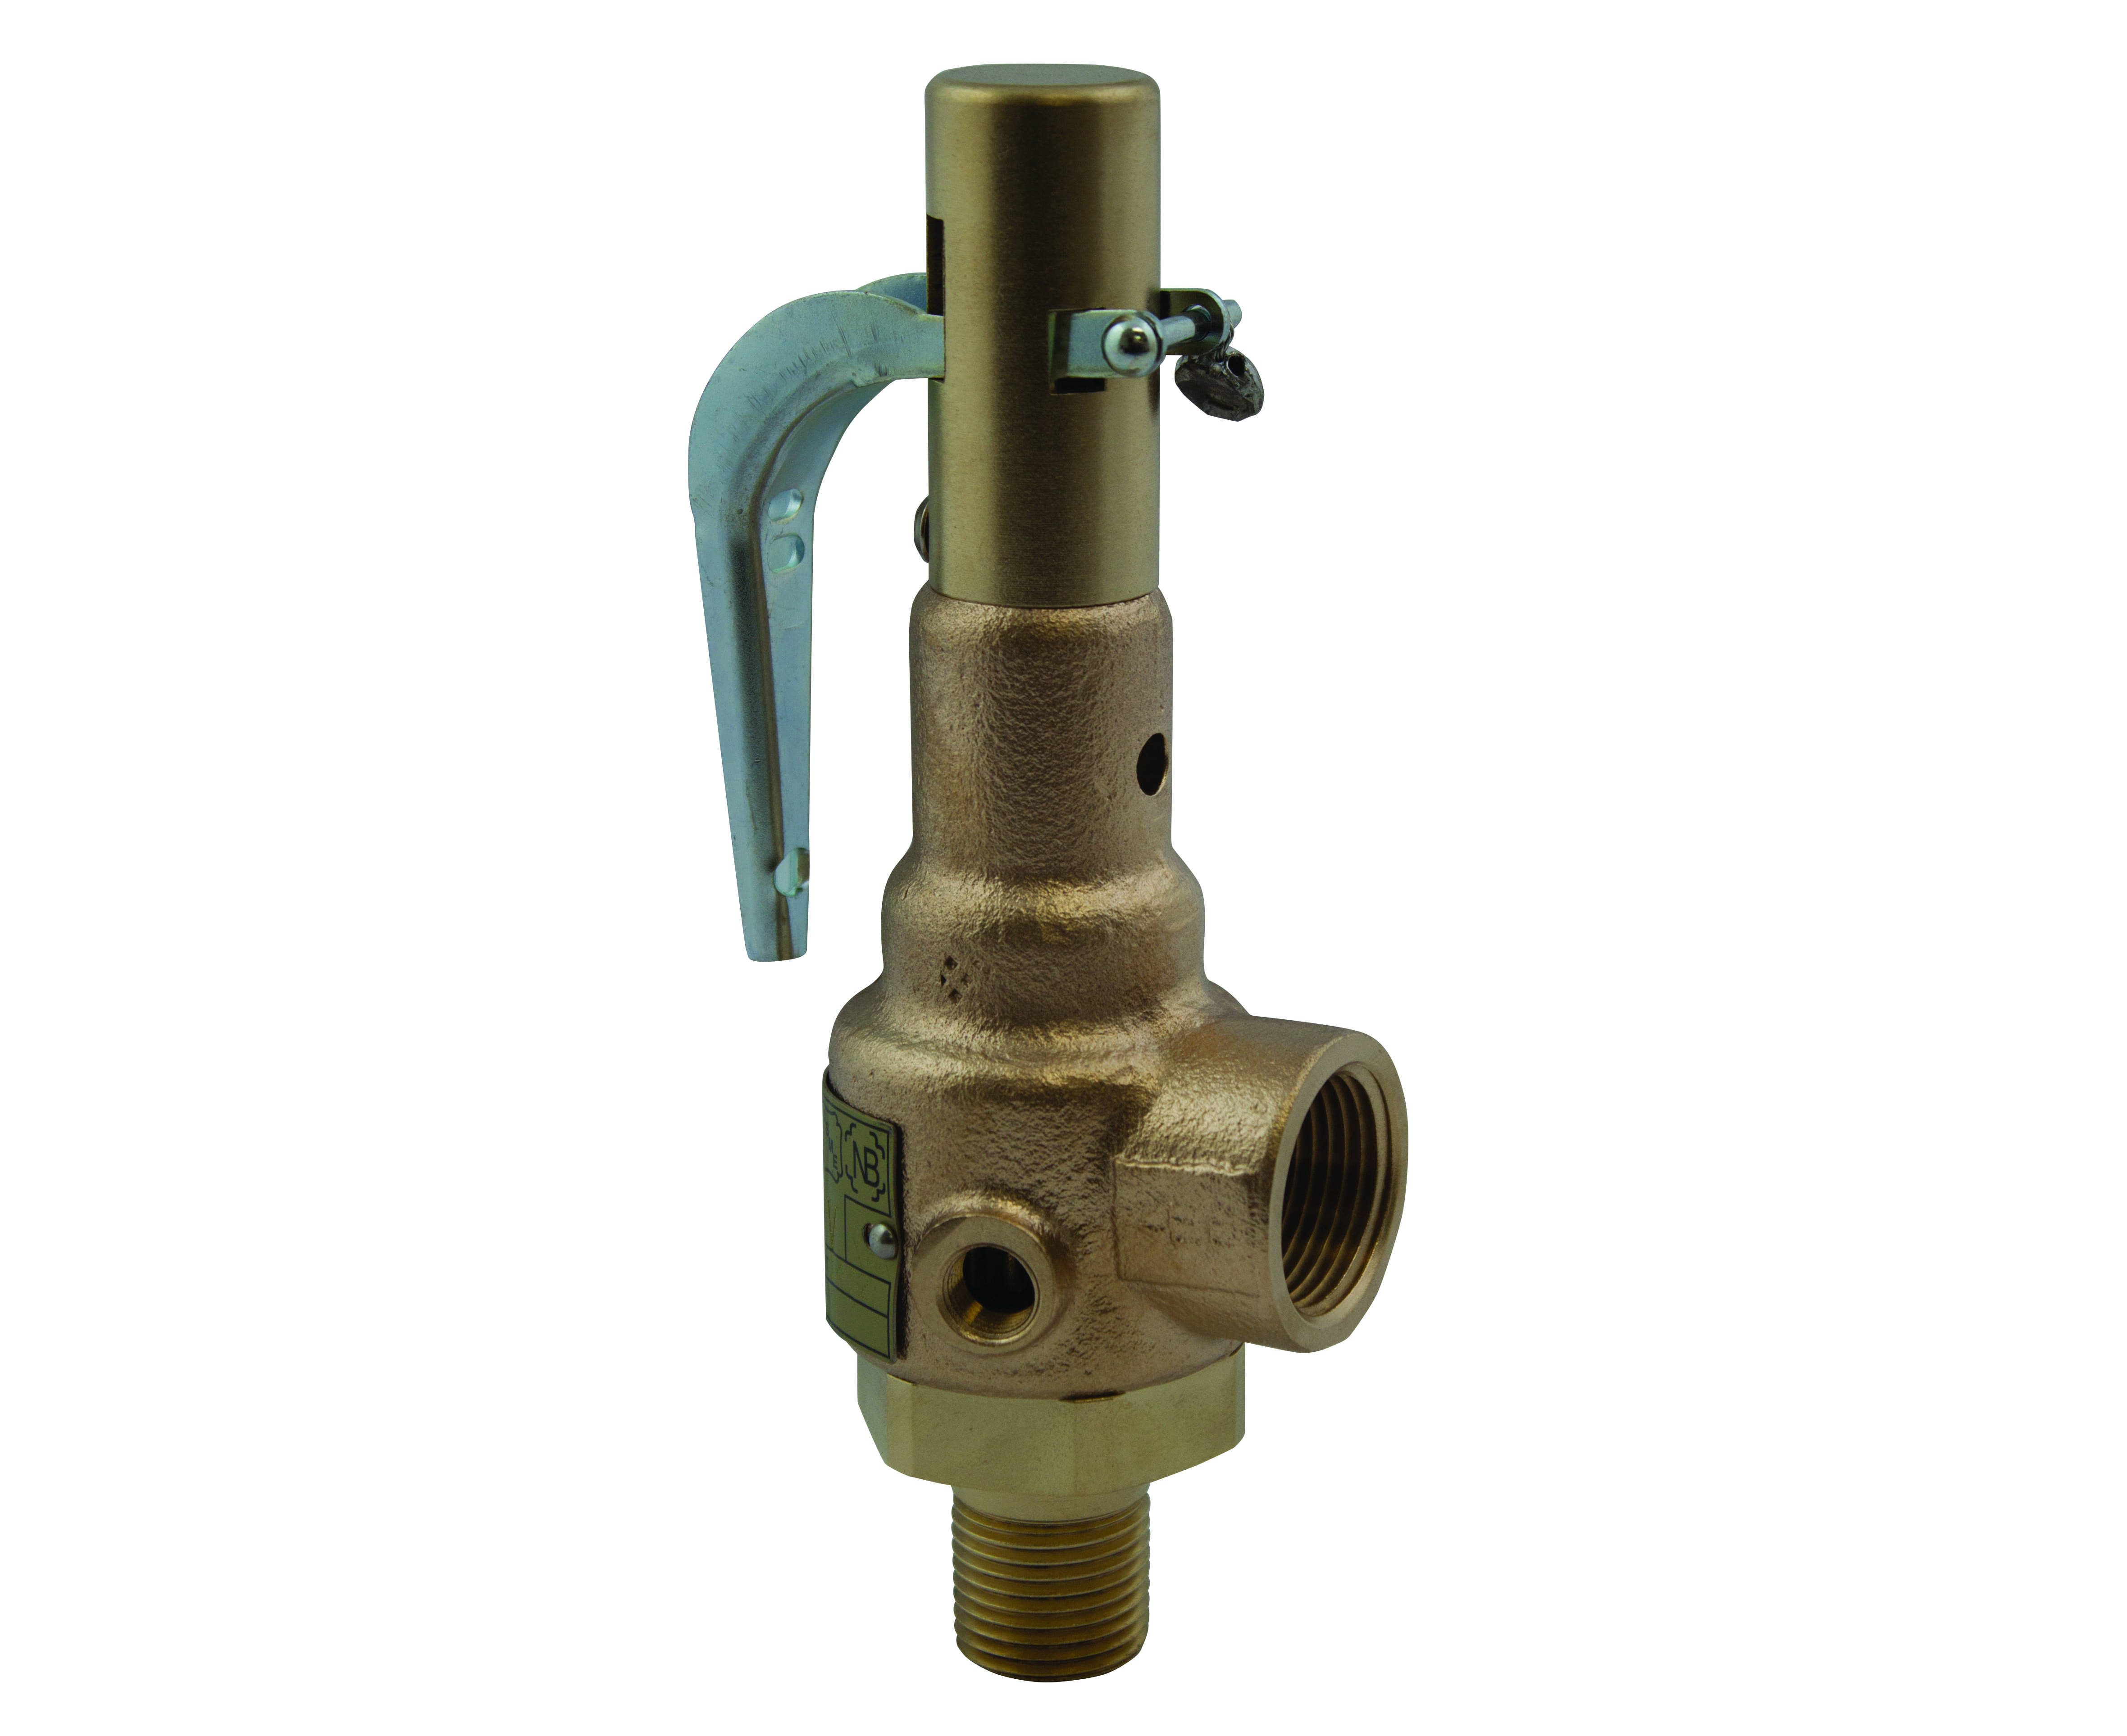 Preview image for Apollo ASME Sec VIII Air Bronze Safety Relief Valves with Brass Trim, Teflon Seat, Performance Test Reports Included, 1" (MNPT x FNPT)